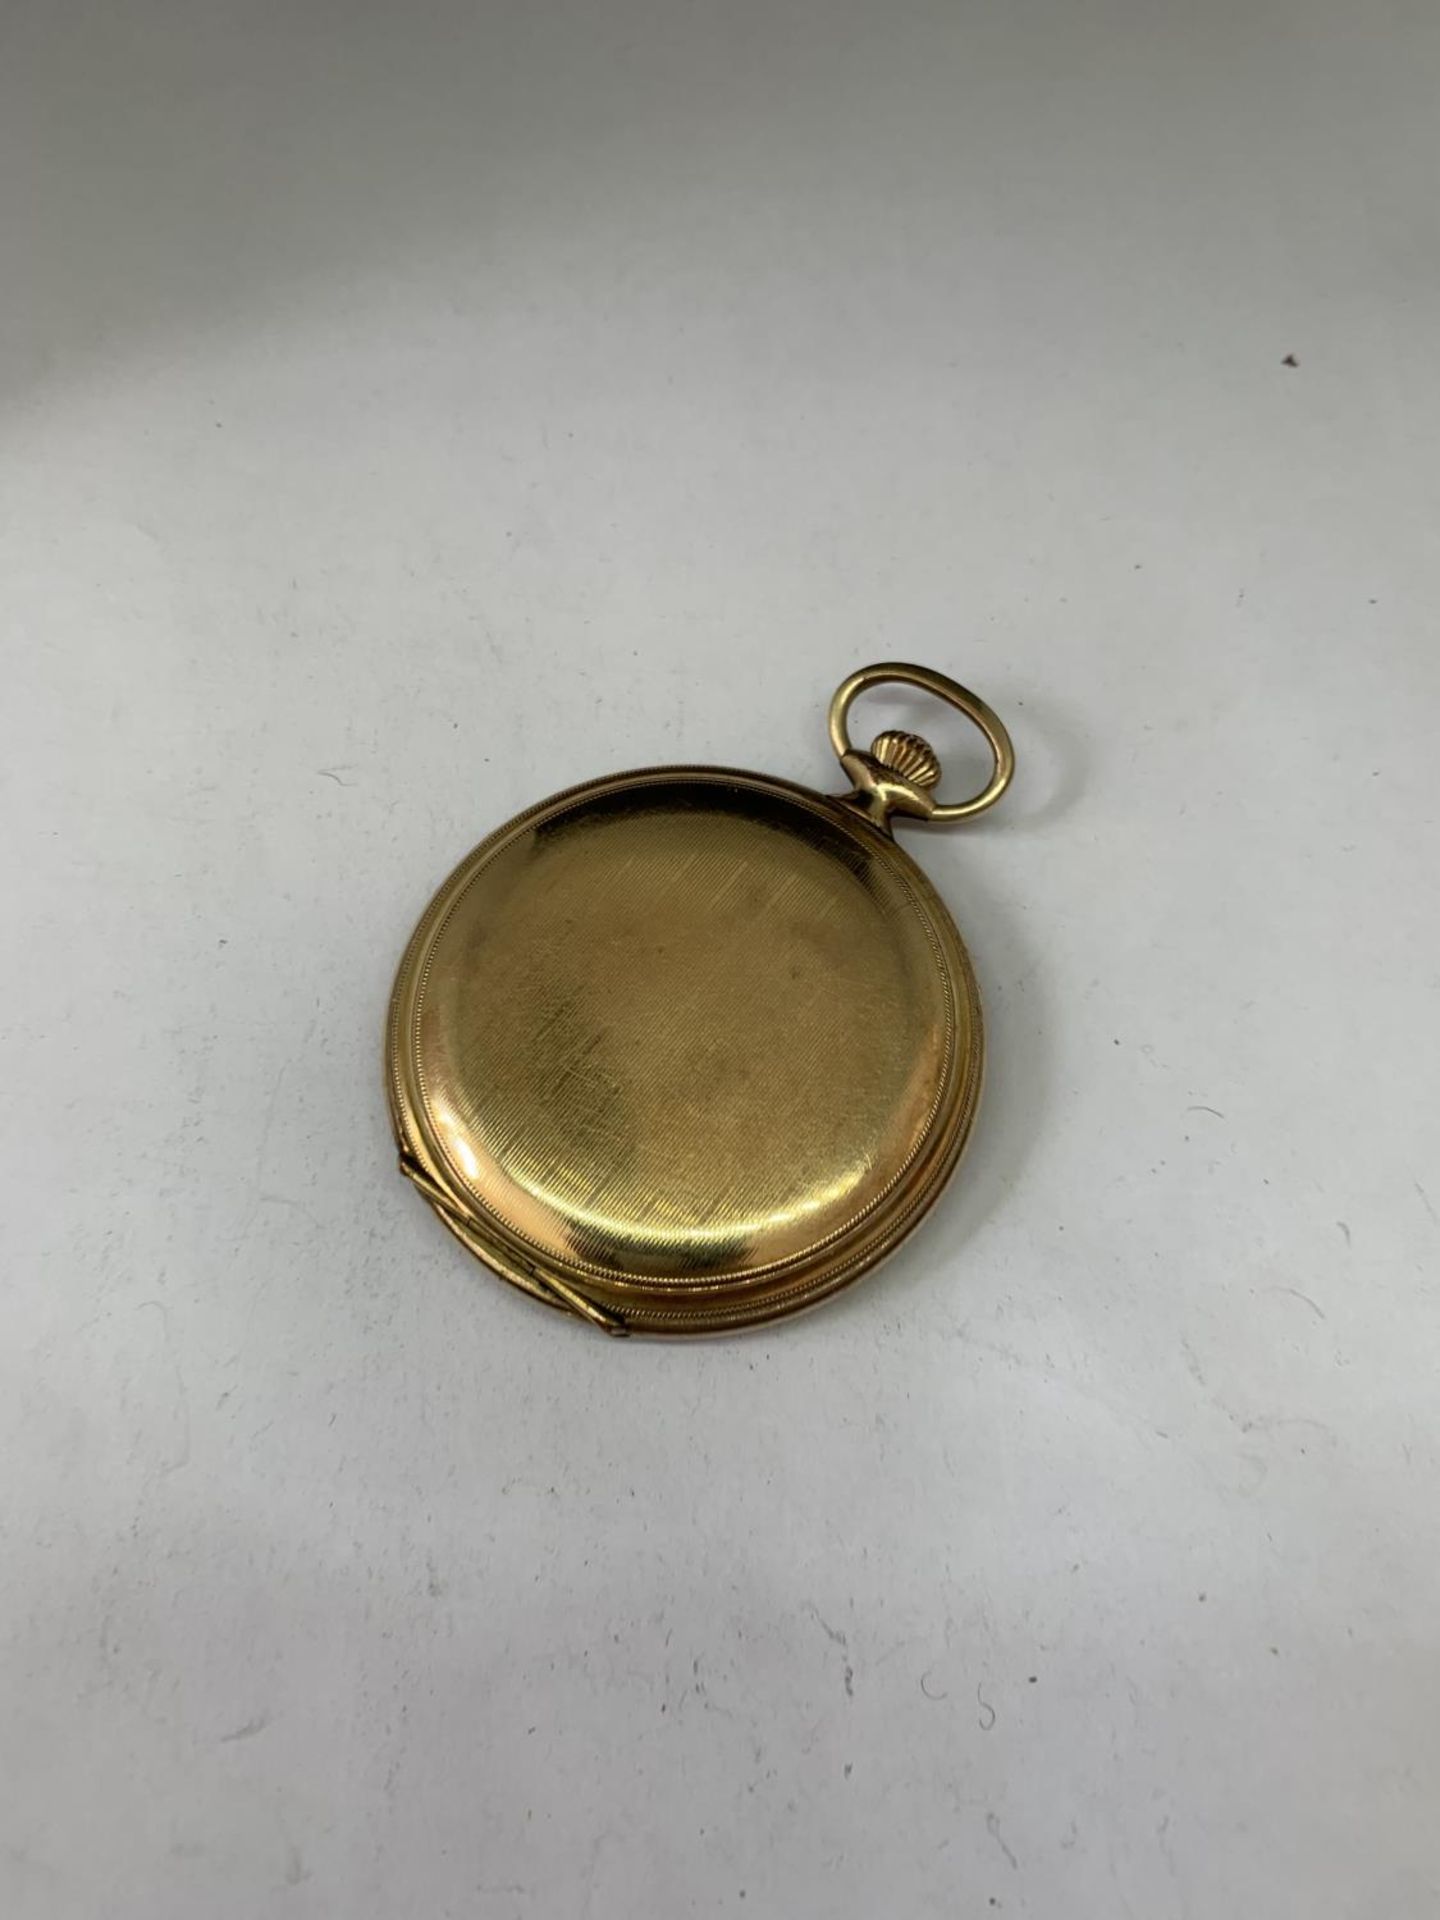 A GERMAN GOLD PLATED POCKET WATCH SEEN WORKING BUT NO WARRANTY - Image 3 of 3